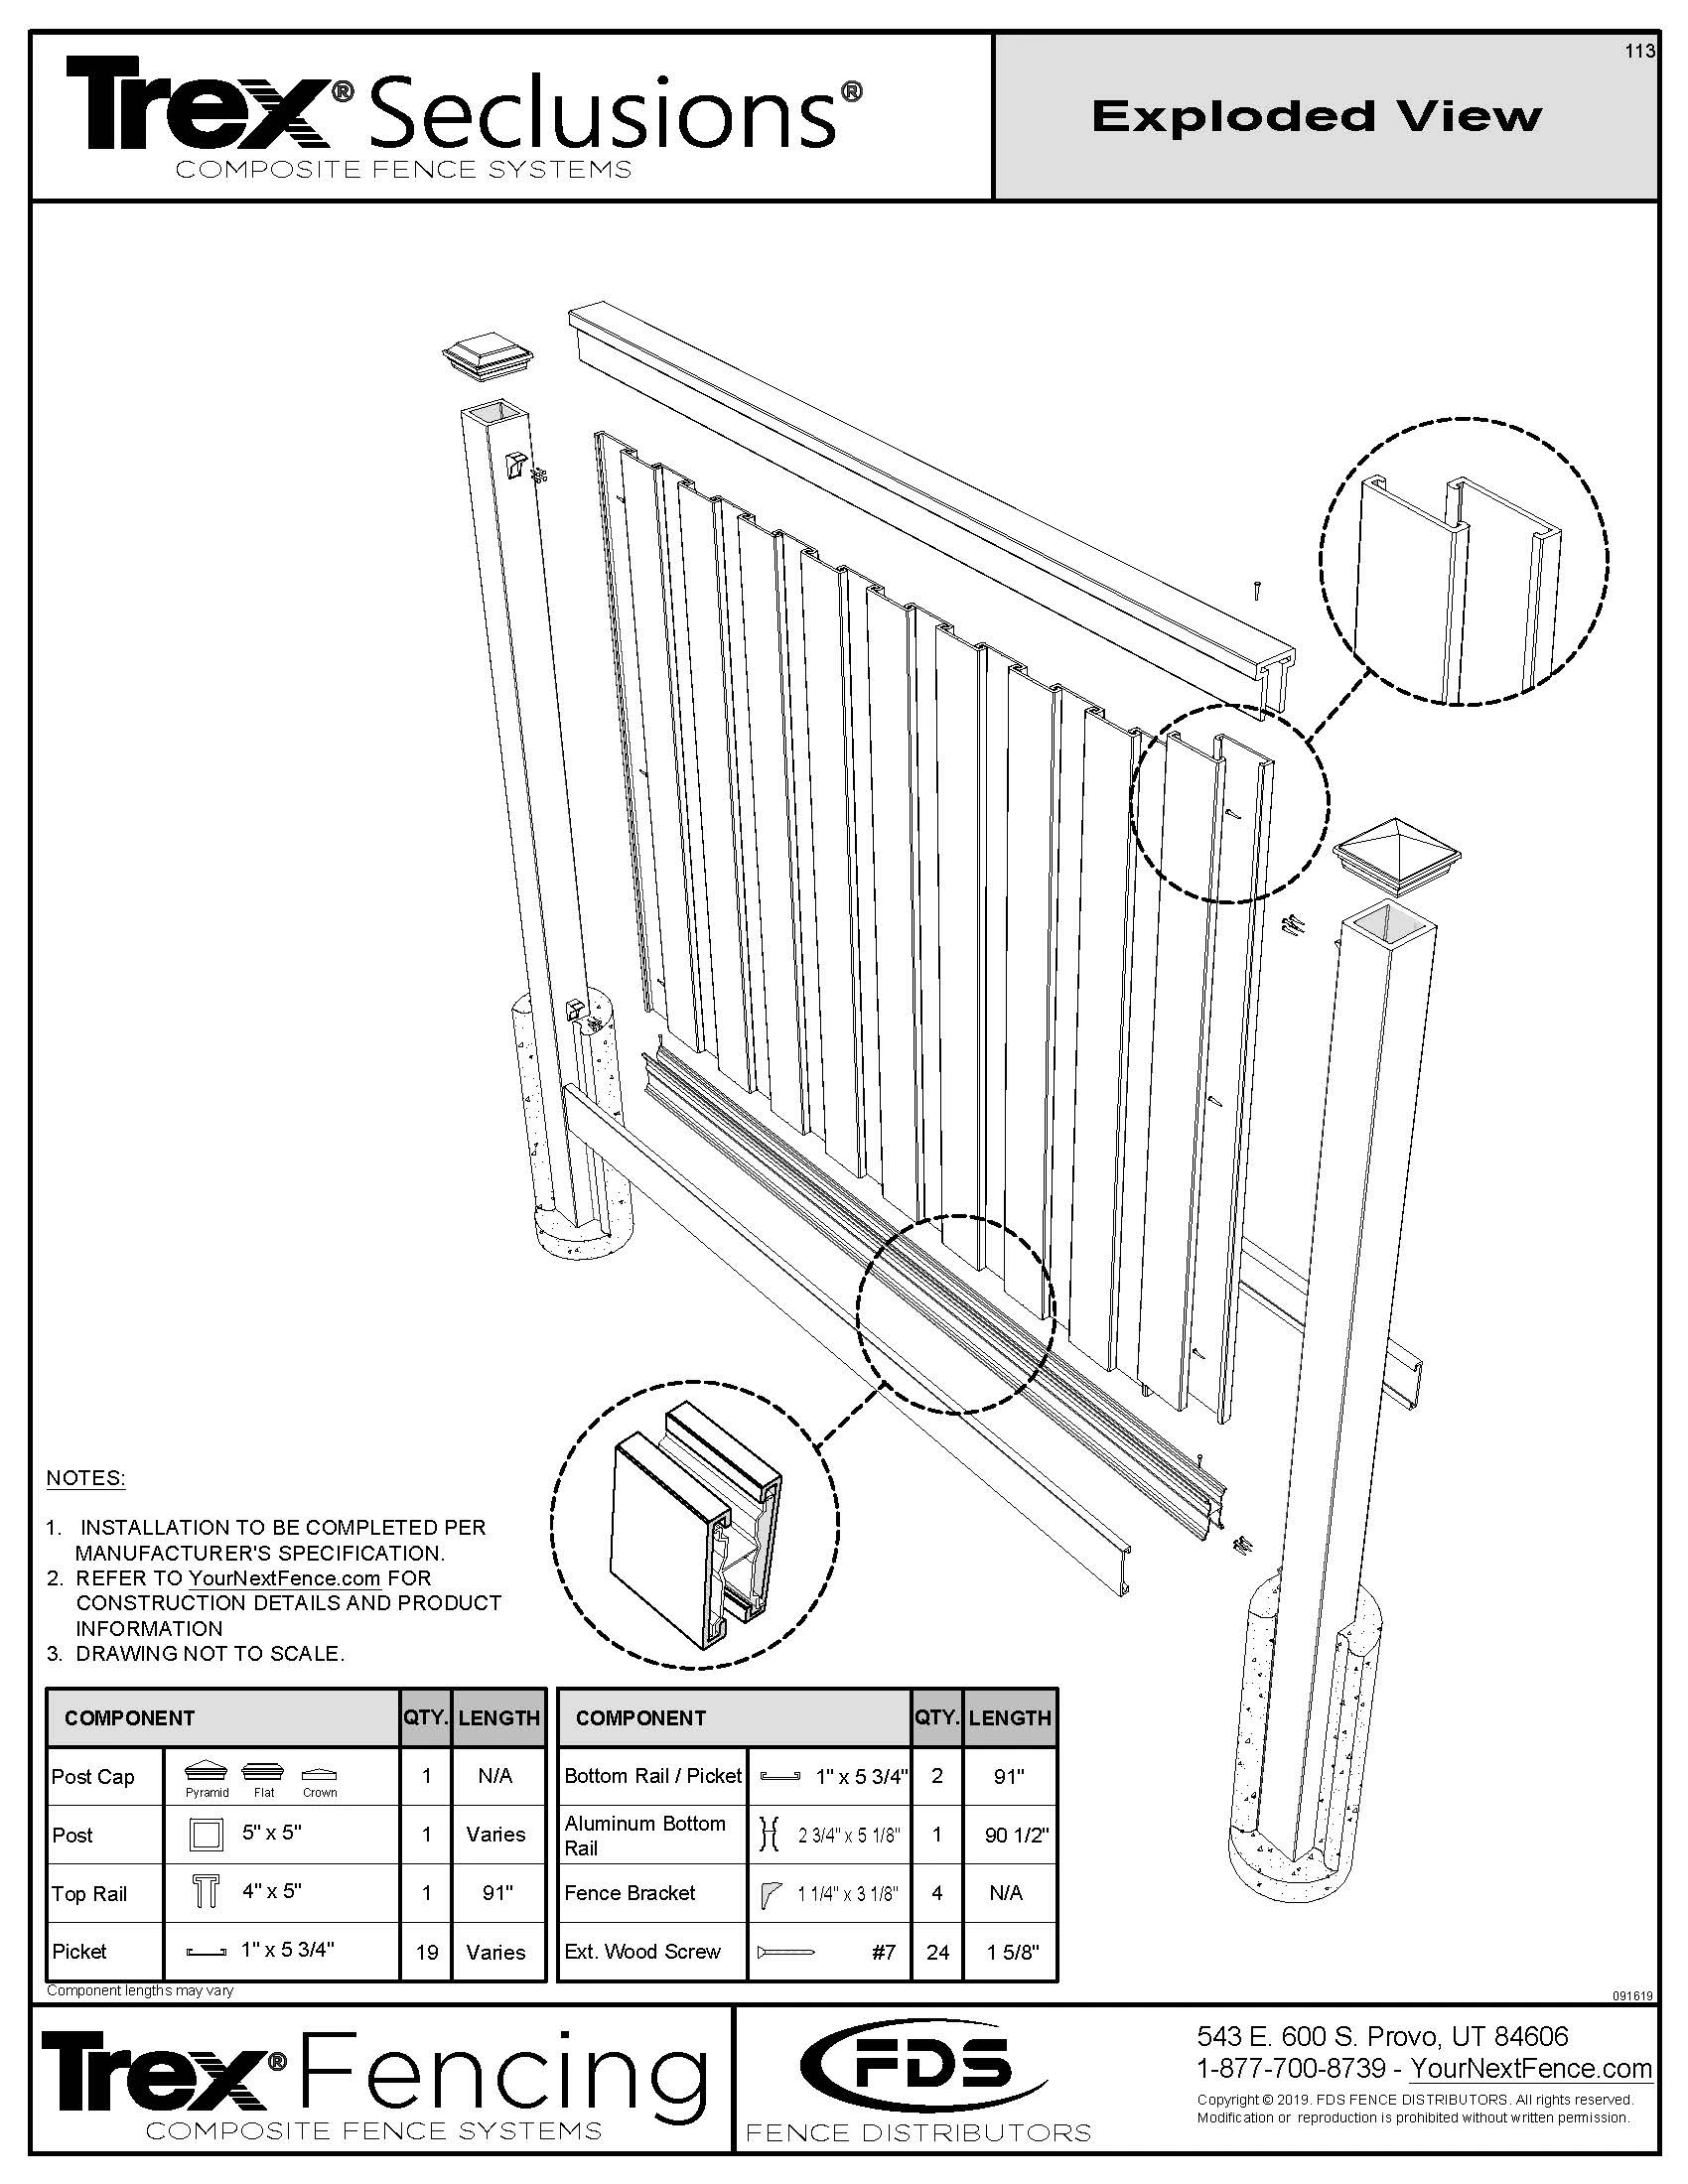 Trex Seclusions Fence Panel Kit - 3-ft. Tall 9